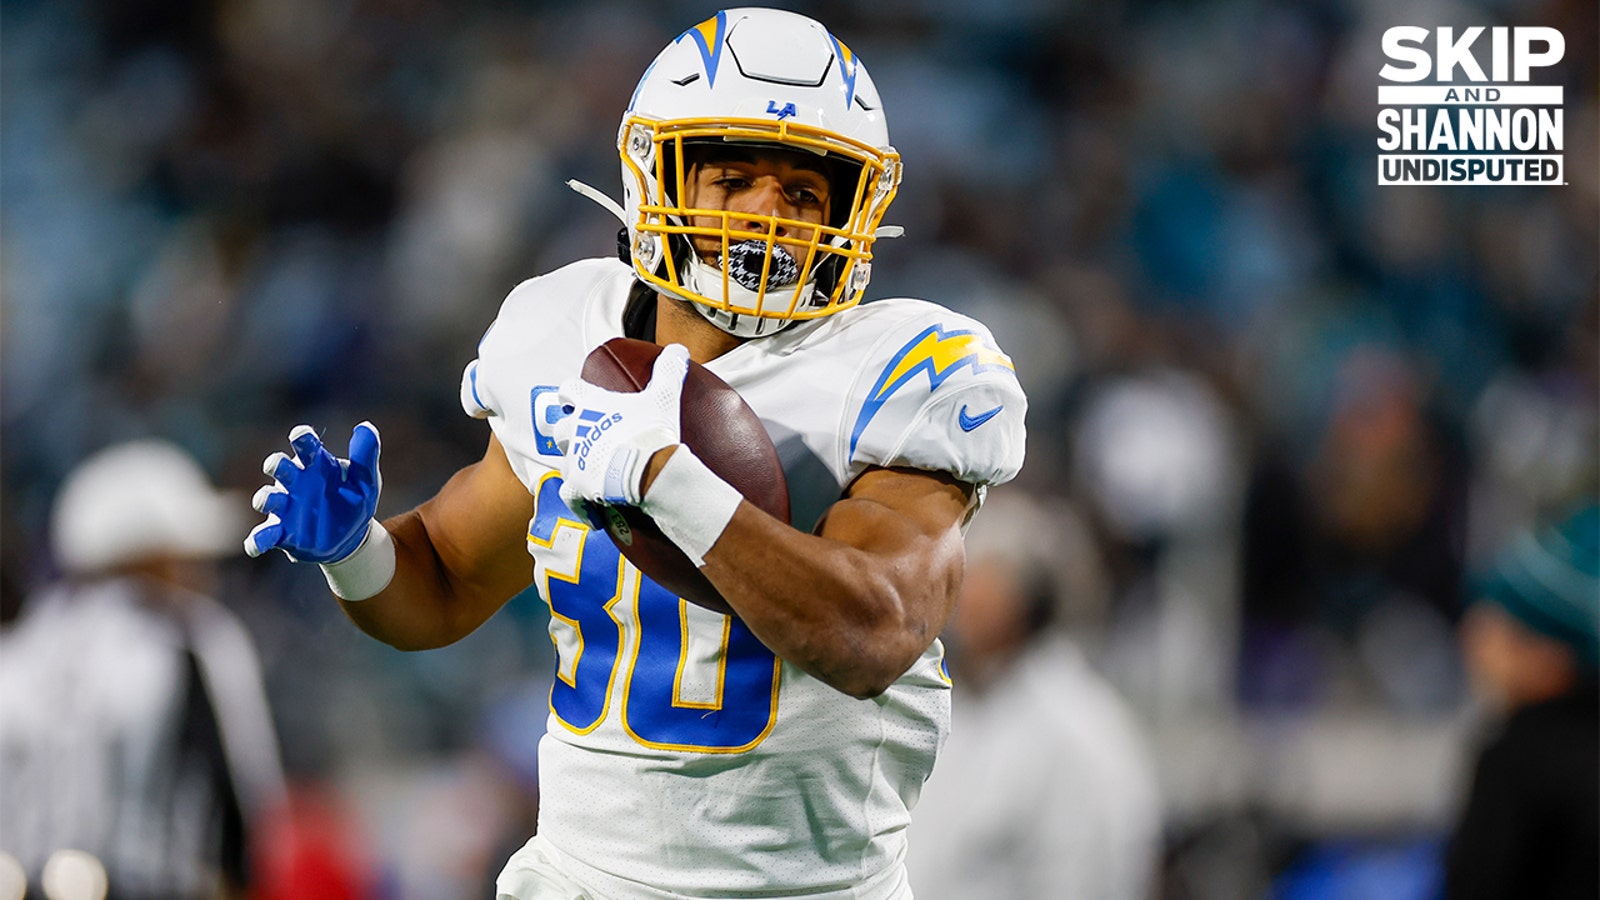 Chargers RB Austin Ekeler discusses his underdog mentality